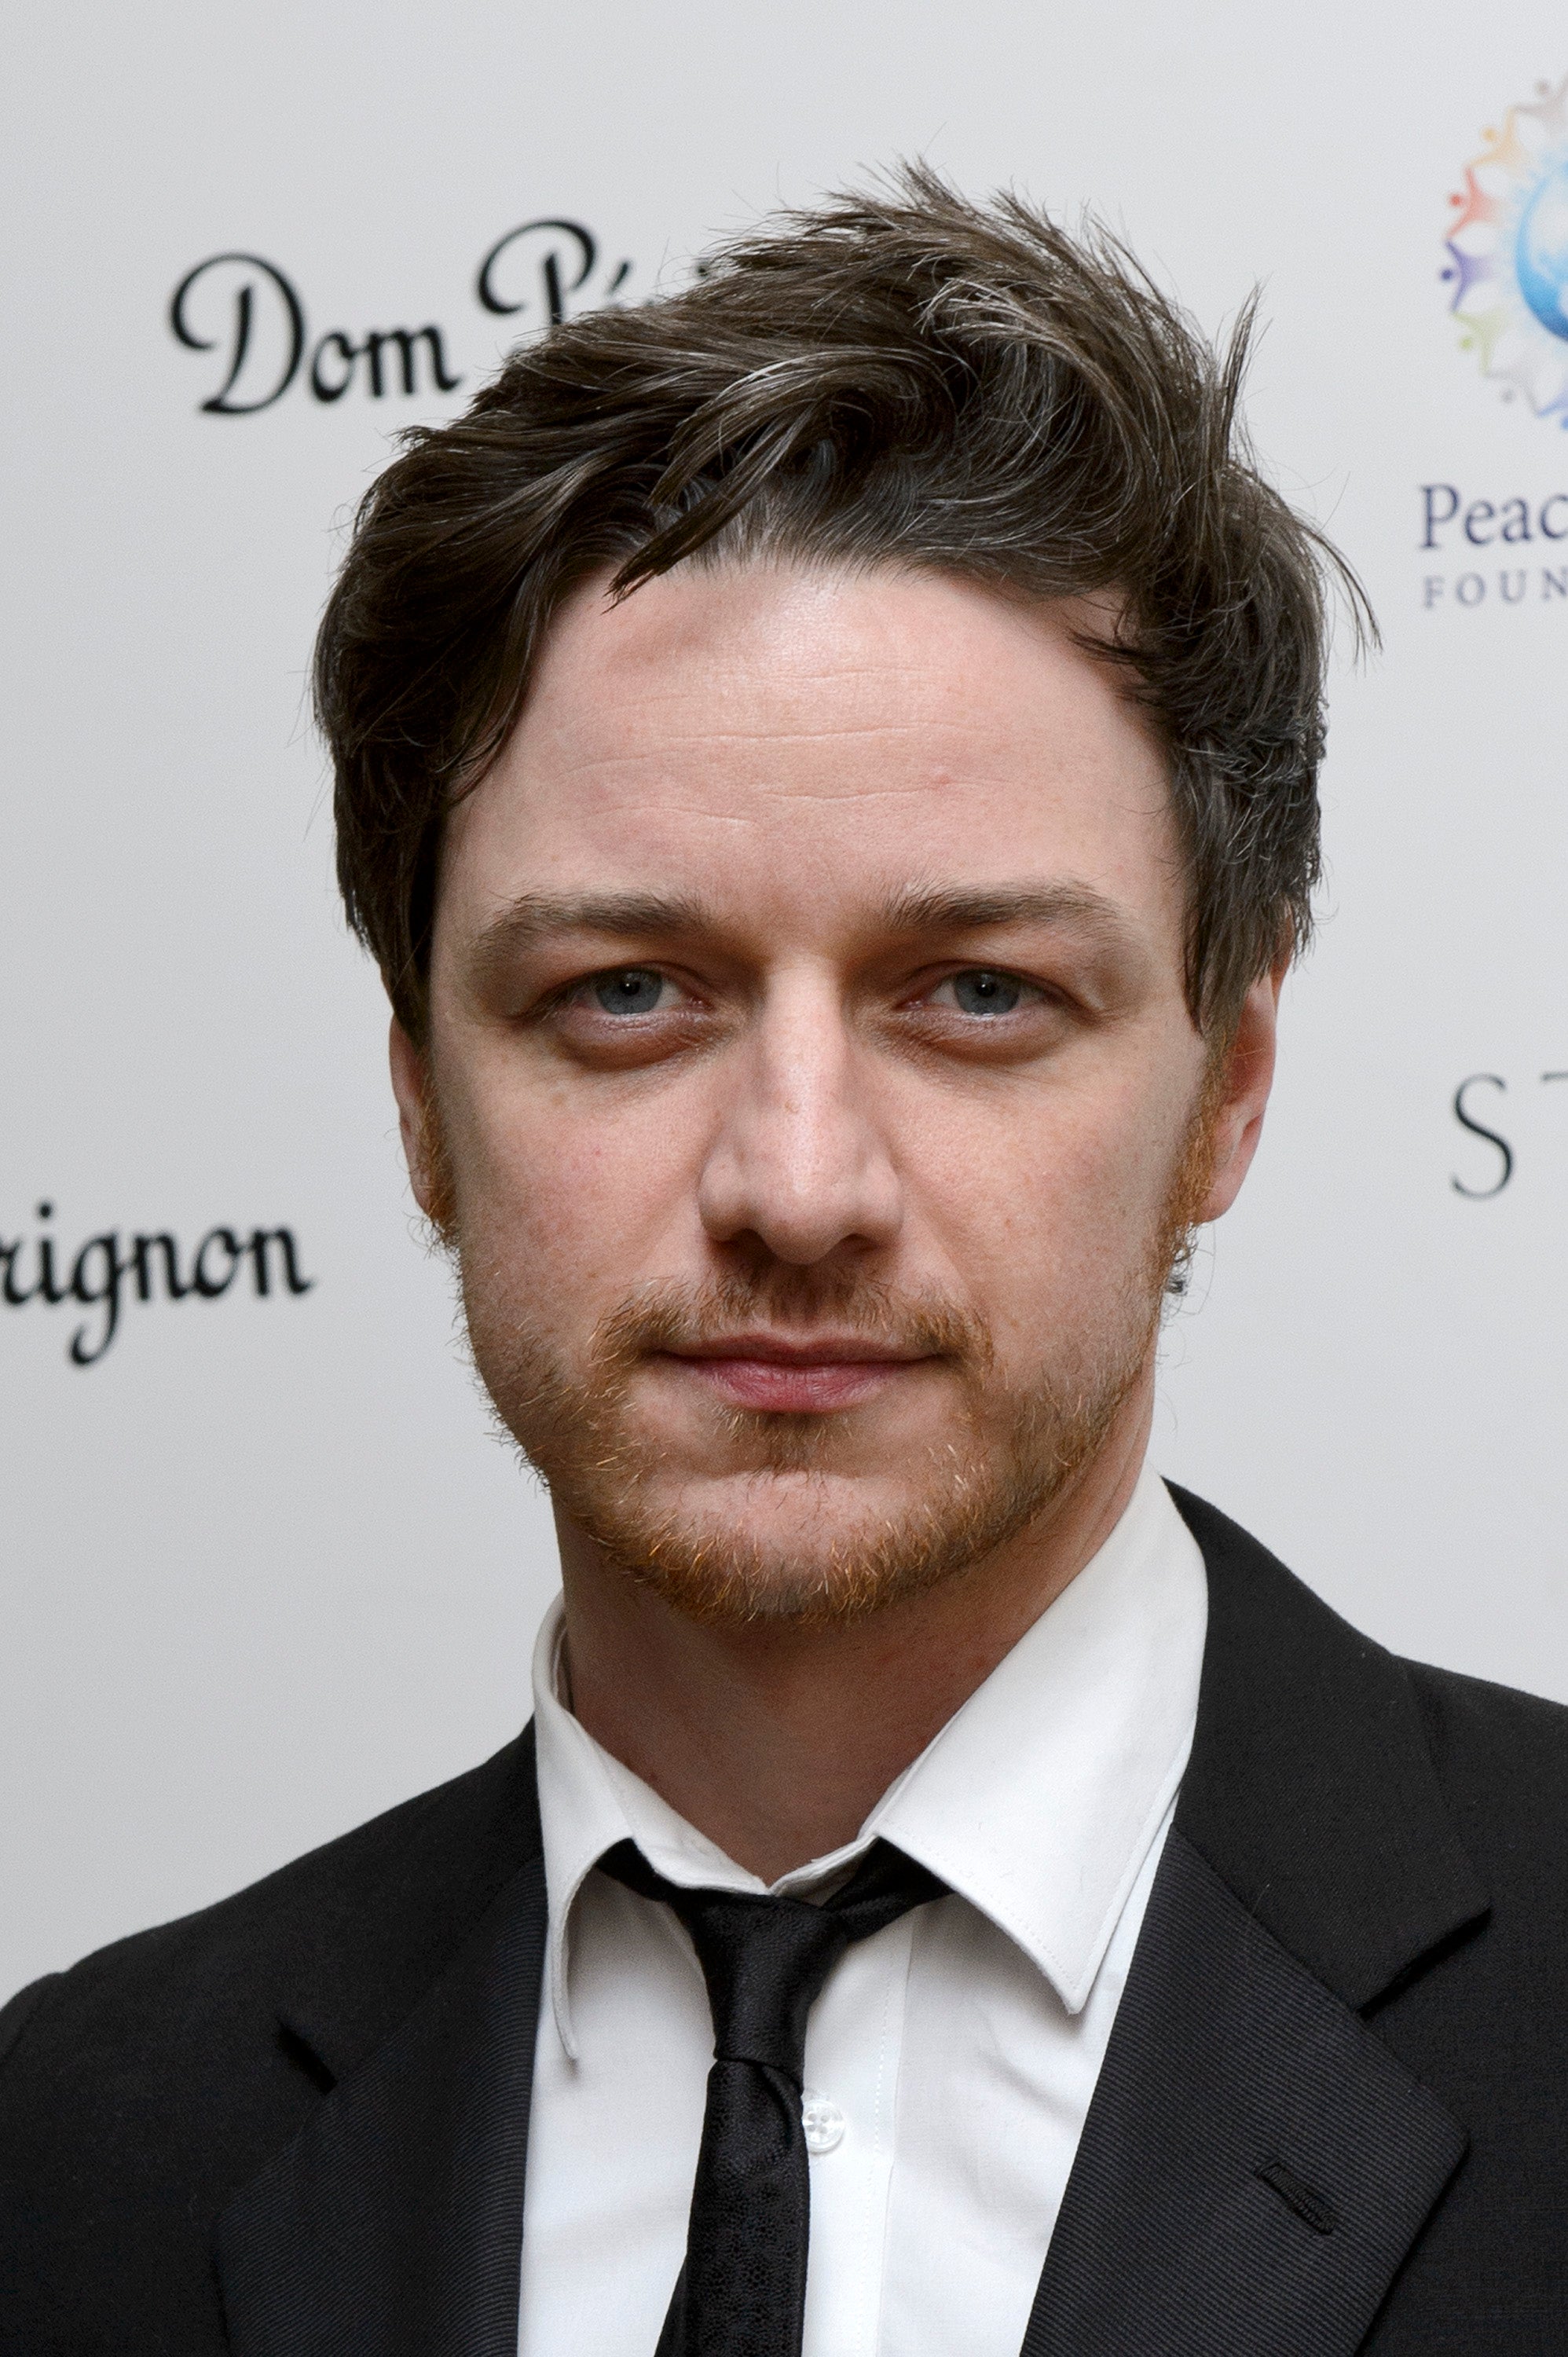 James McAvoy has dropped out of Wikileaks film after work commitments conflicted